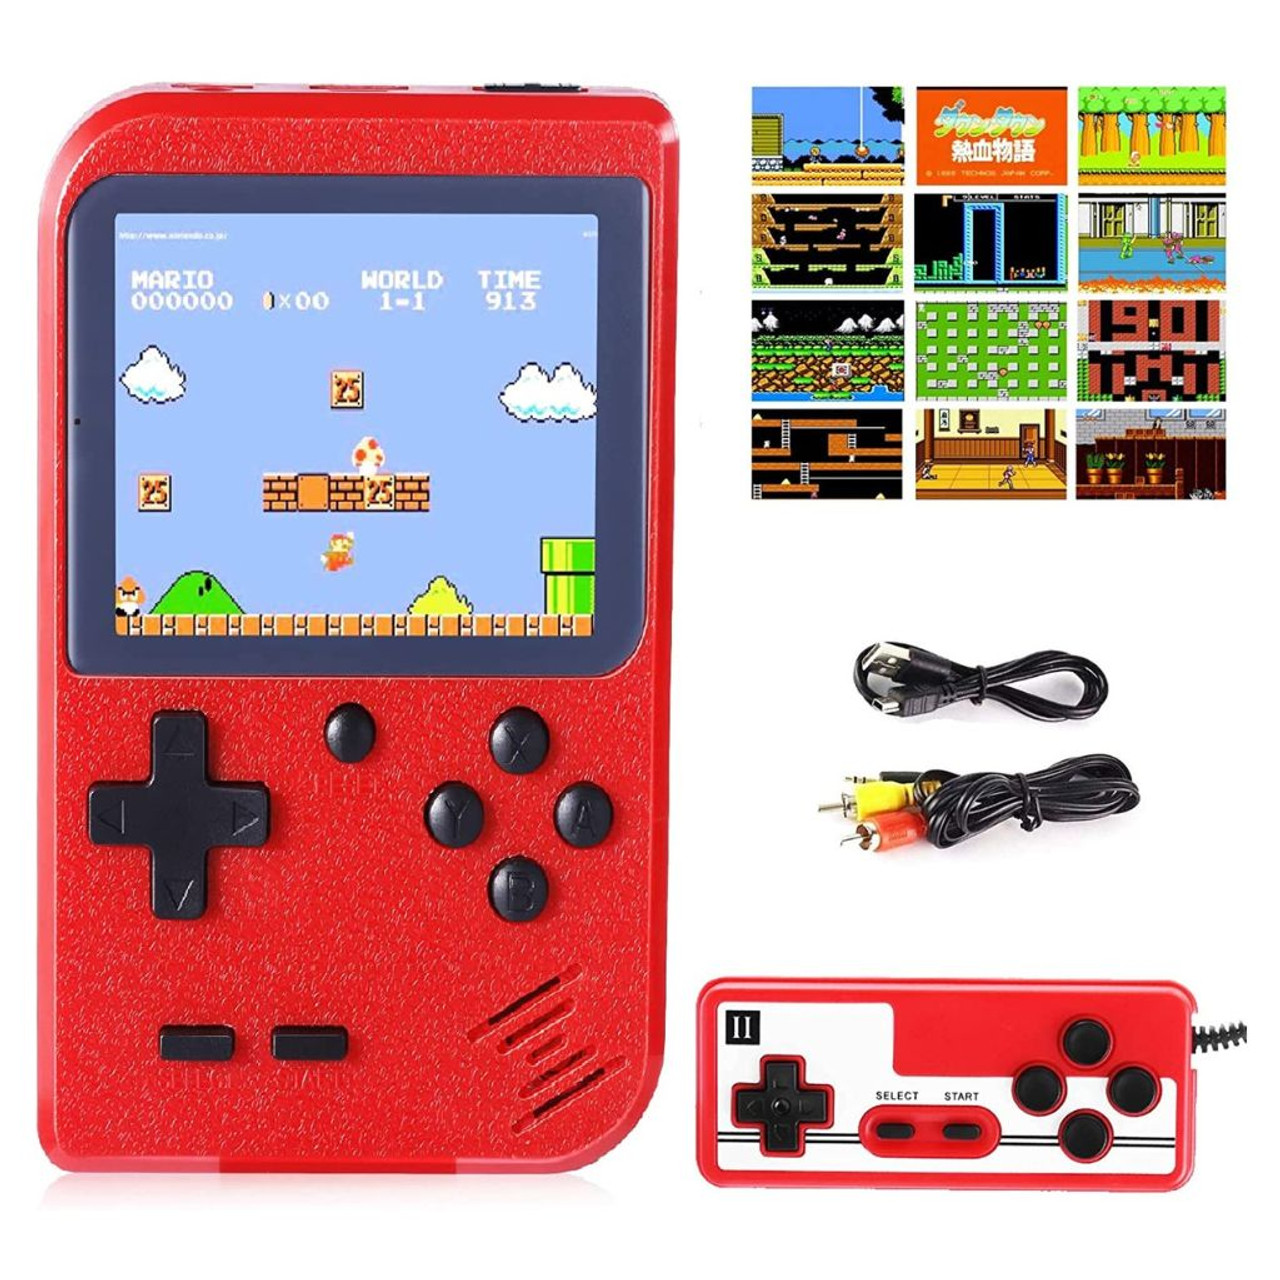 Portable Handheld Game System with 400 Inbuilt Classic Games product image